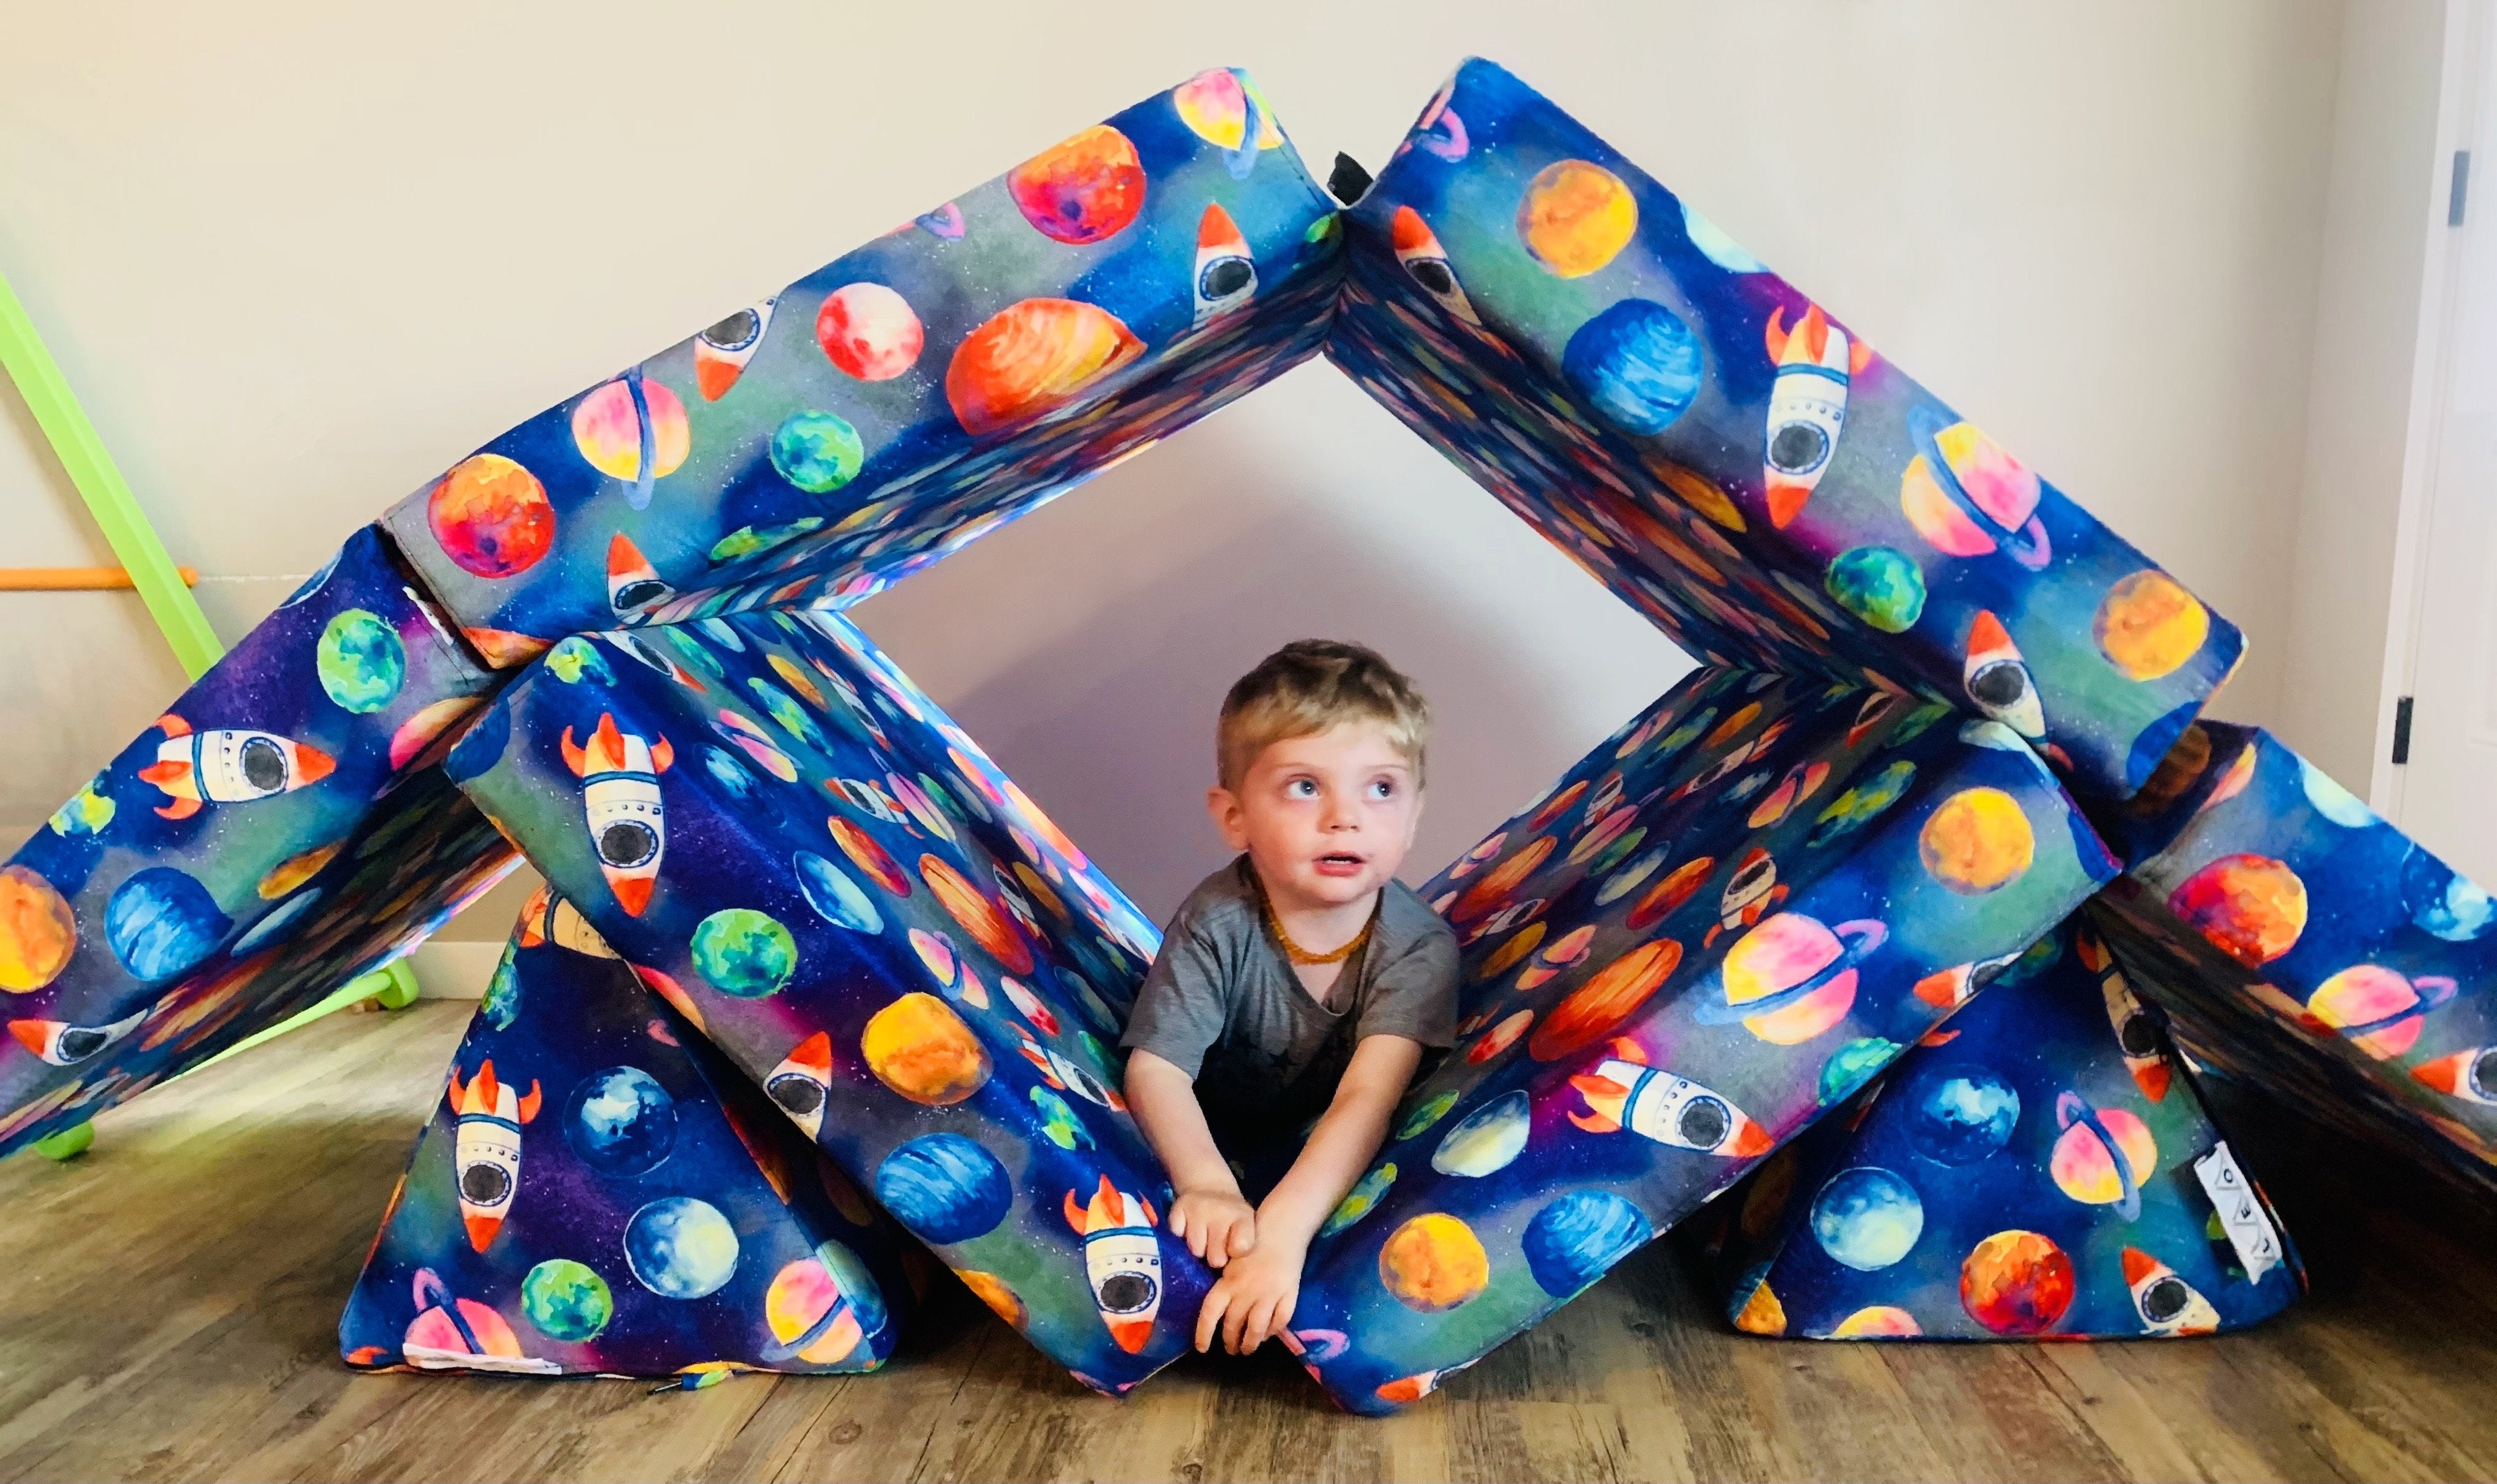 The Lunar Space LeoMat™ is a foldable play mat for kids of all ages